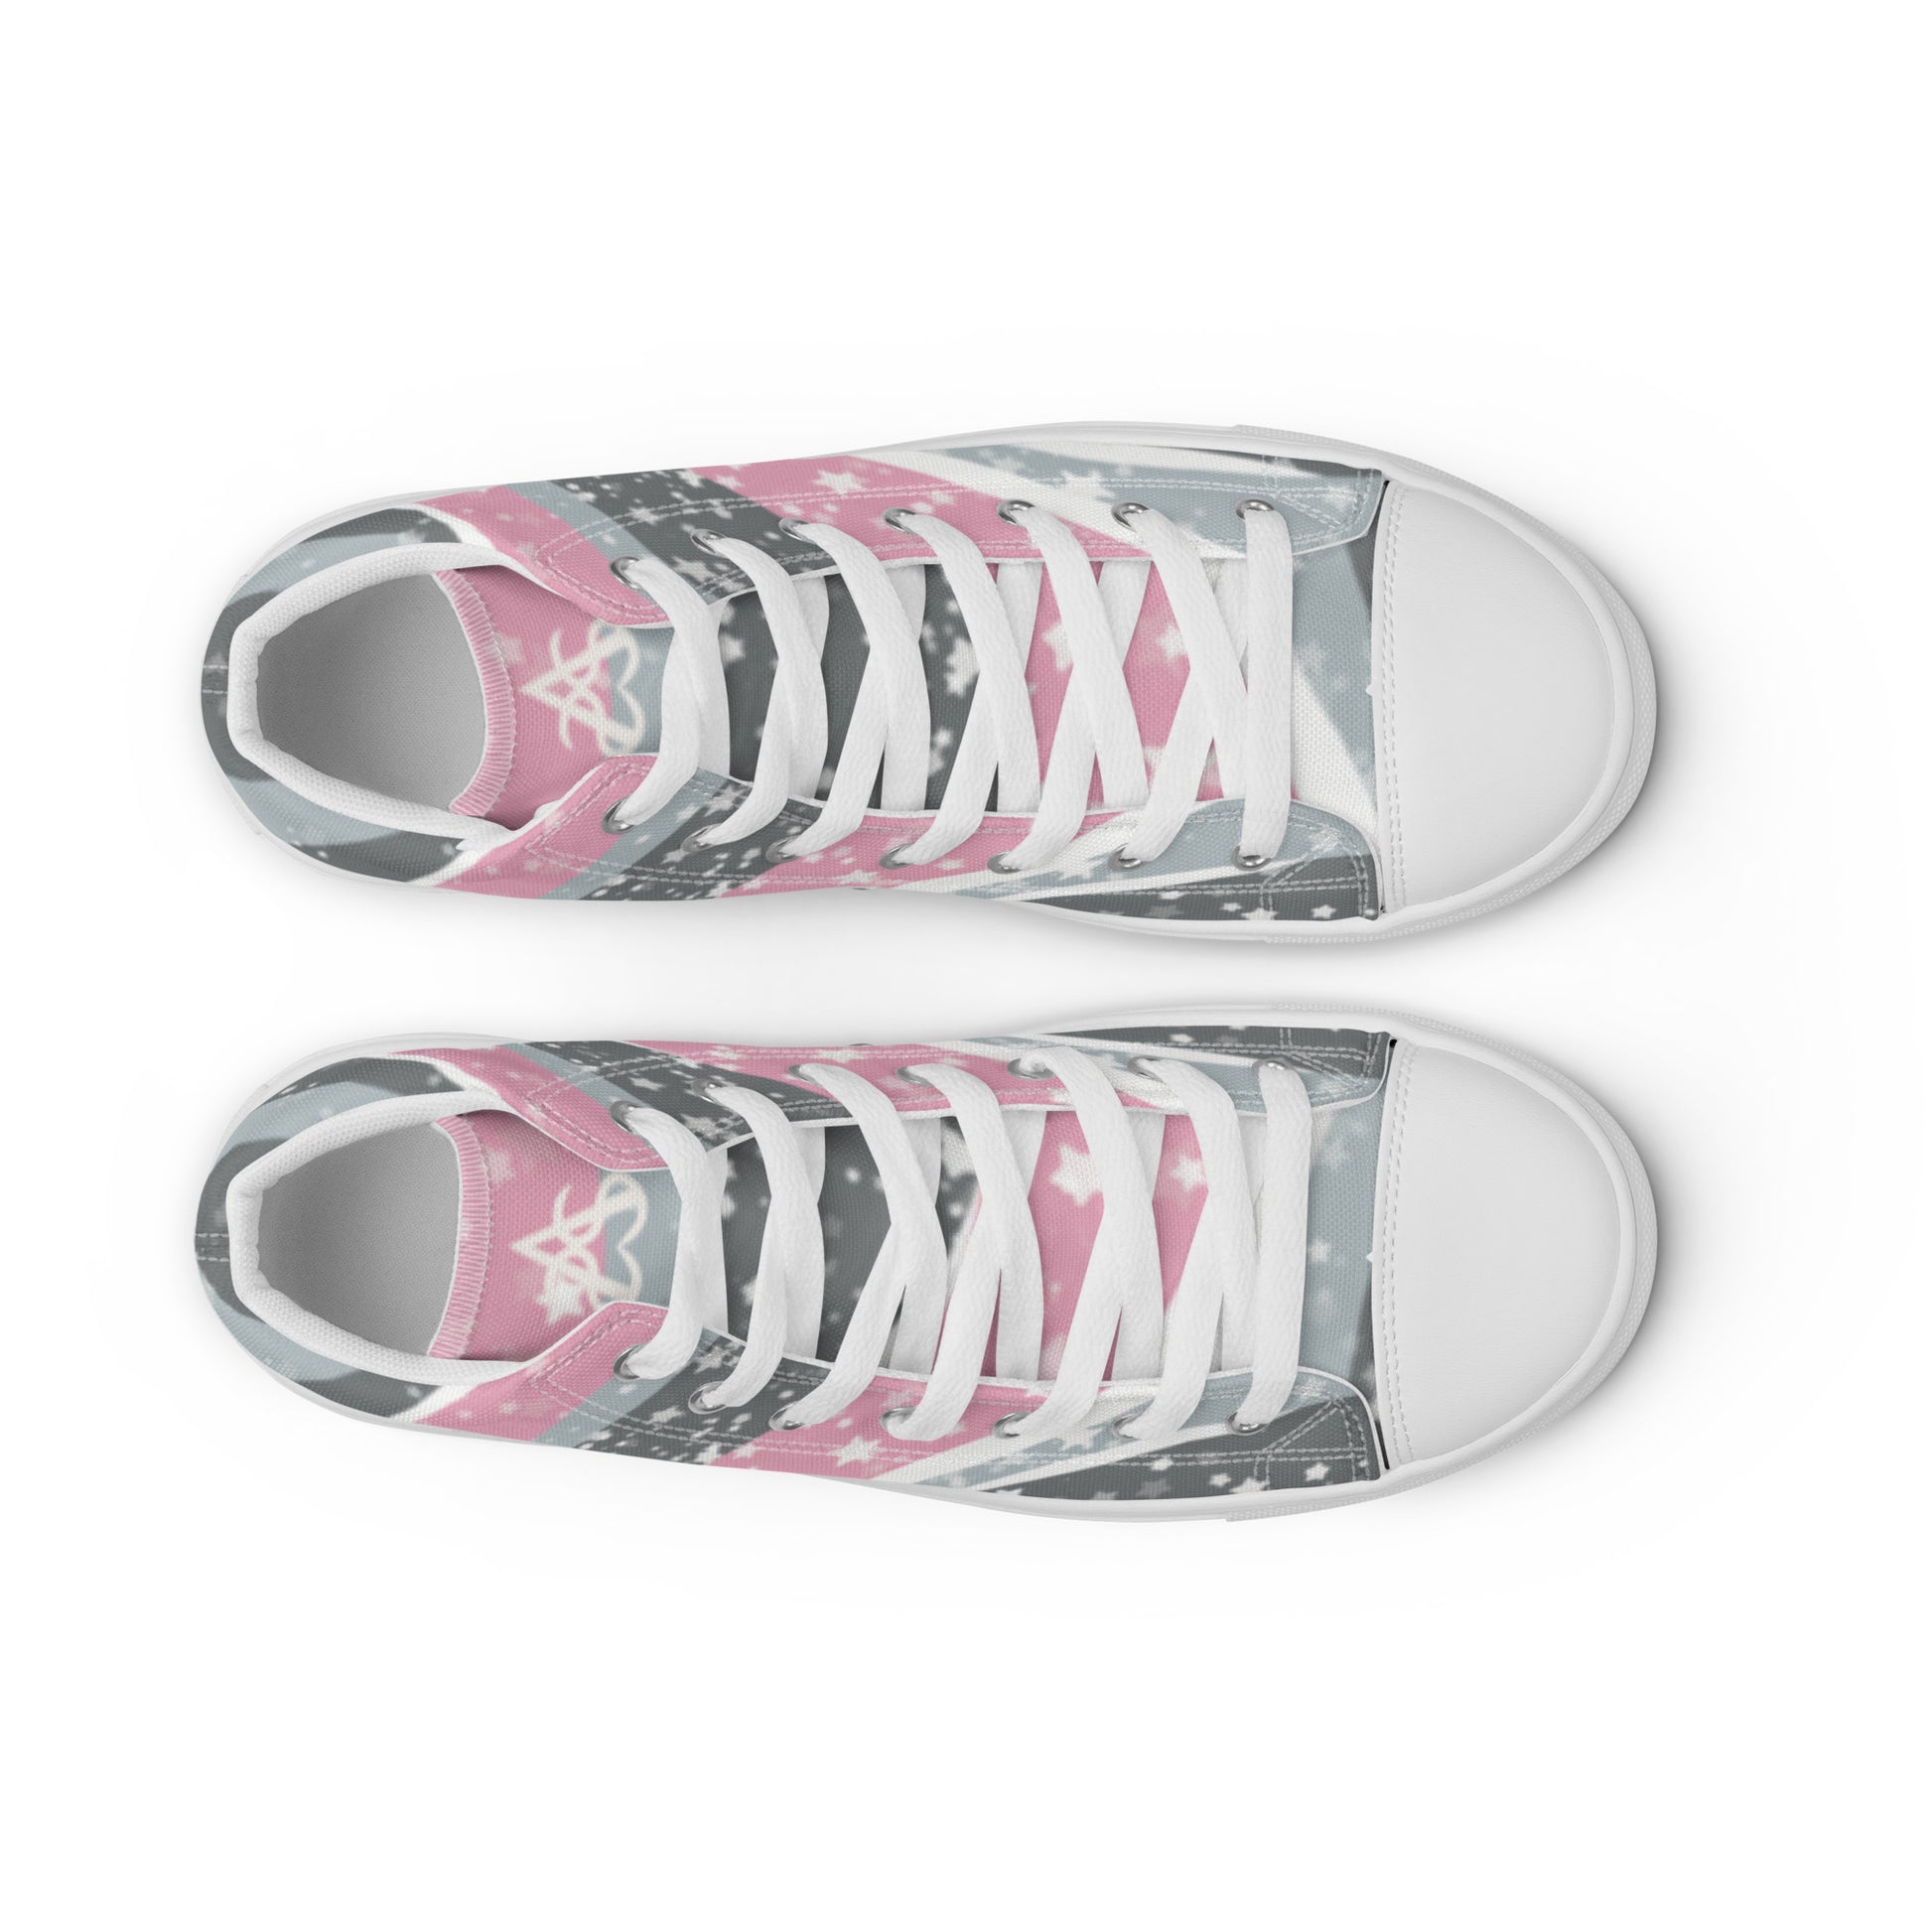 Top view: A pair of high top shoes with ribbons of the demigirl flag colors and stars coming from the heel and getting larger across the shoe to the laces.